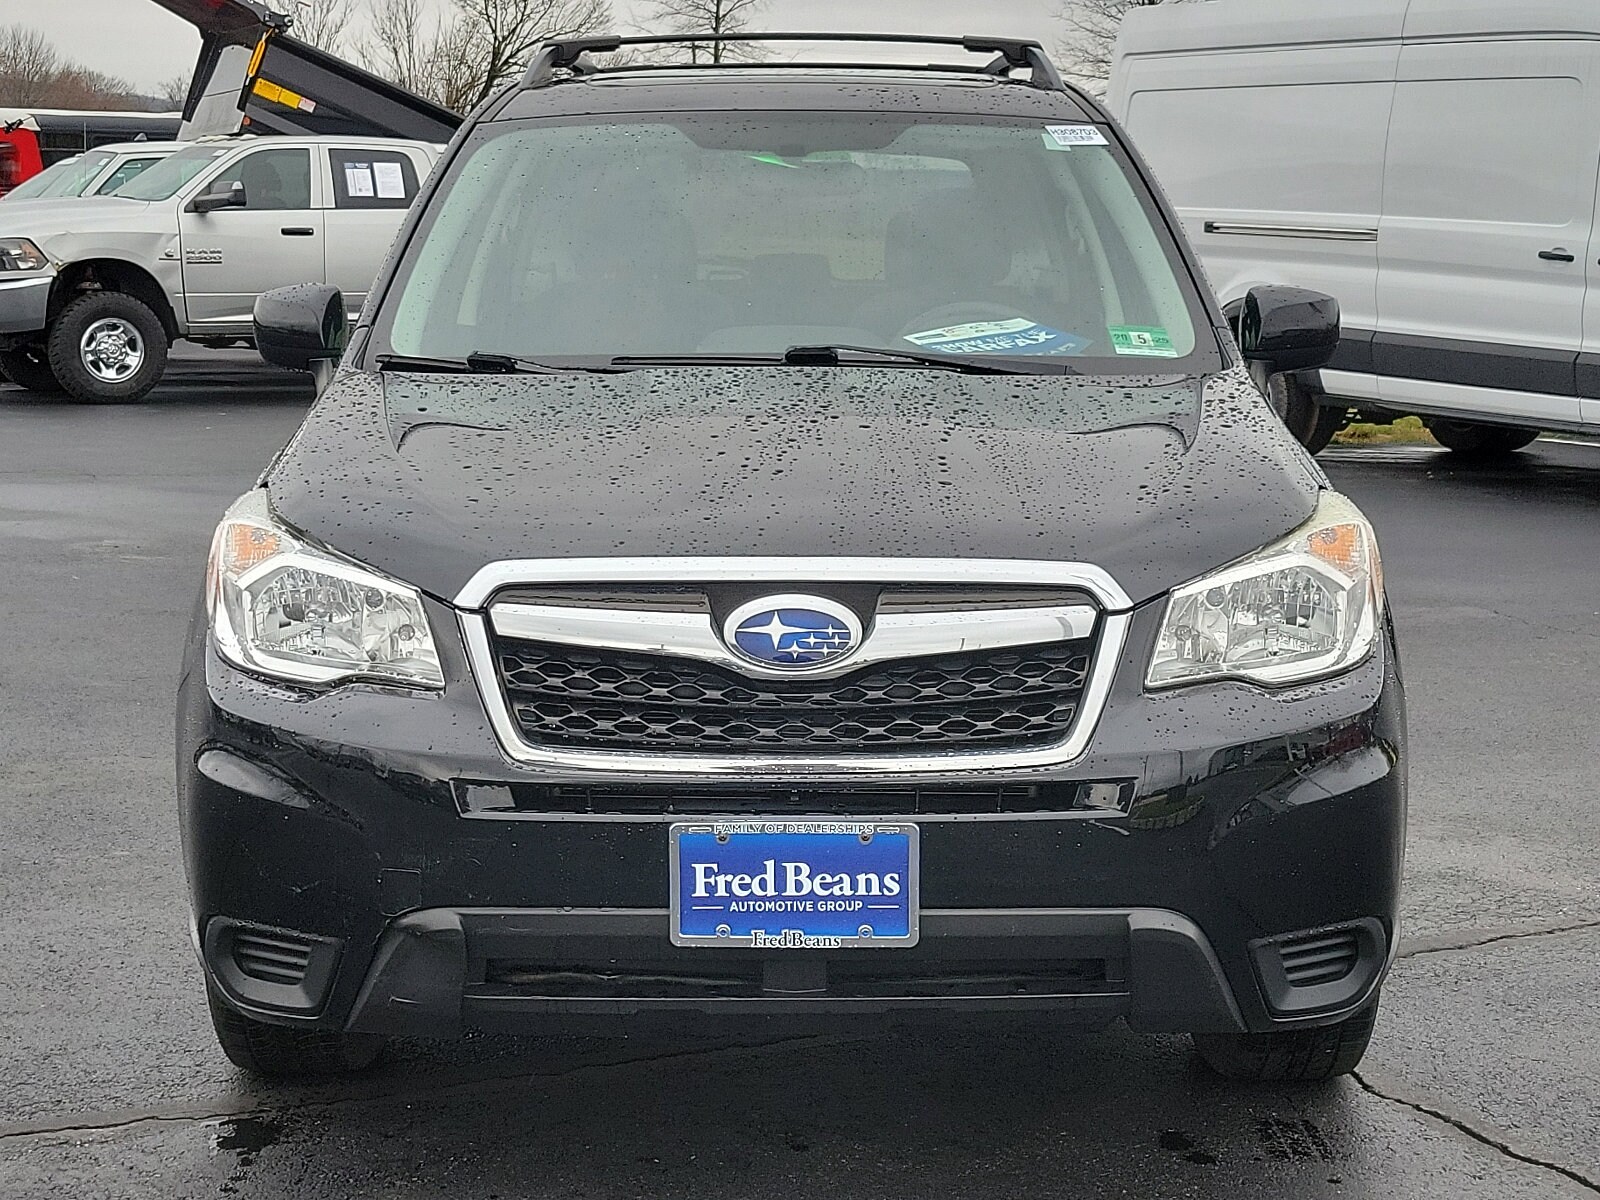 Used 2016 Subaru Forester i Premium with VIN JF2SJADC0GH547802 for sale in Washington, NJ